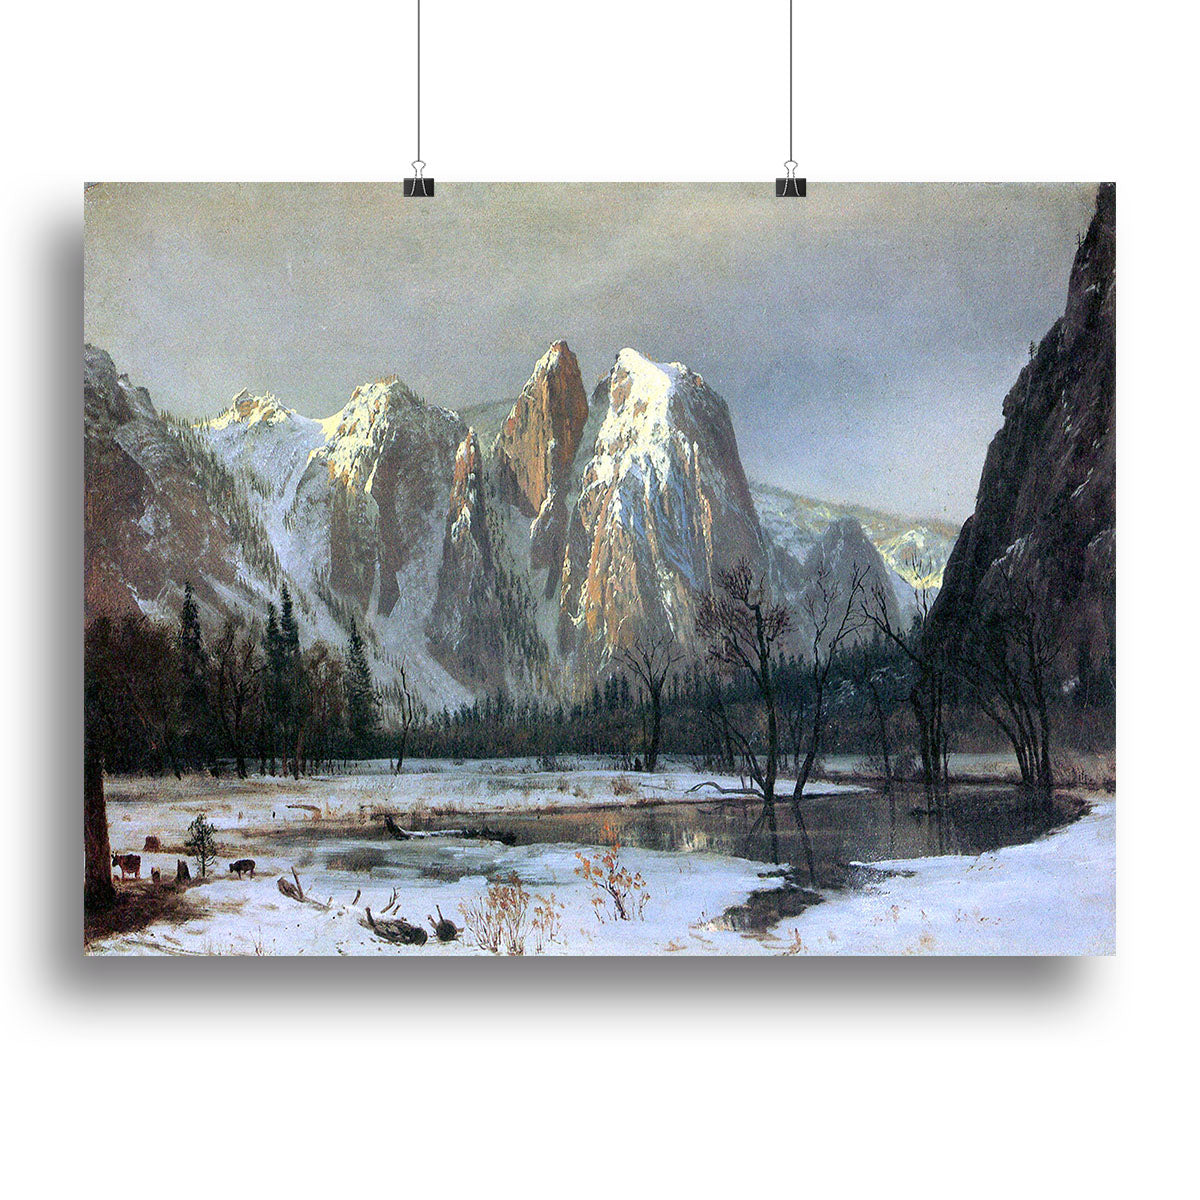 Cathedral Rocks Yosemite by Bierstadt Canvas Print or Poster - Canvas Art Rocks - 2